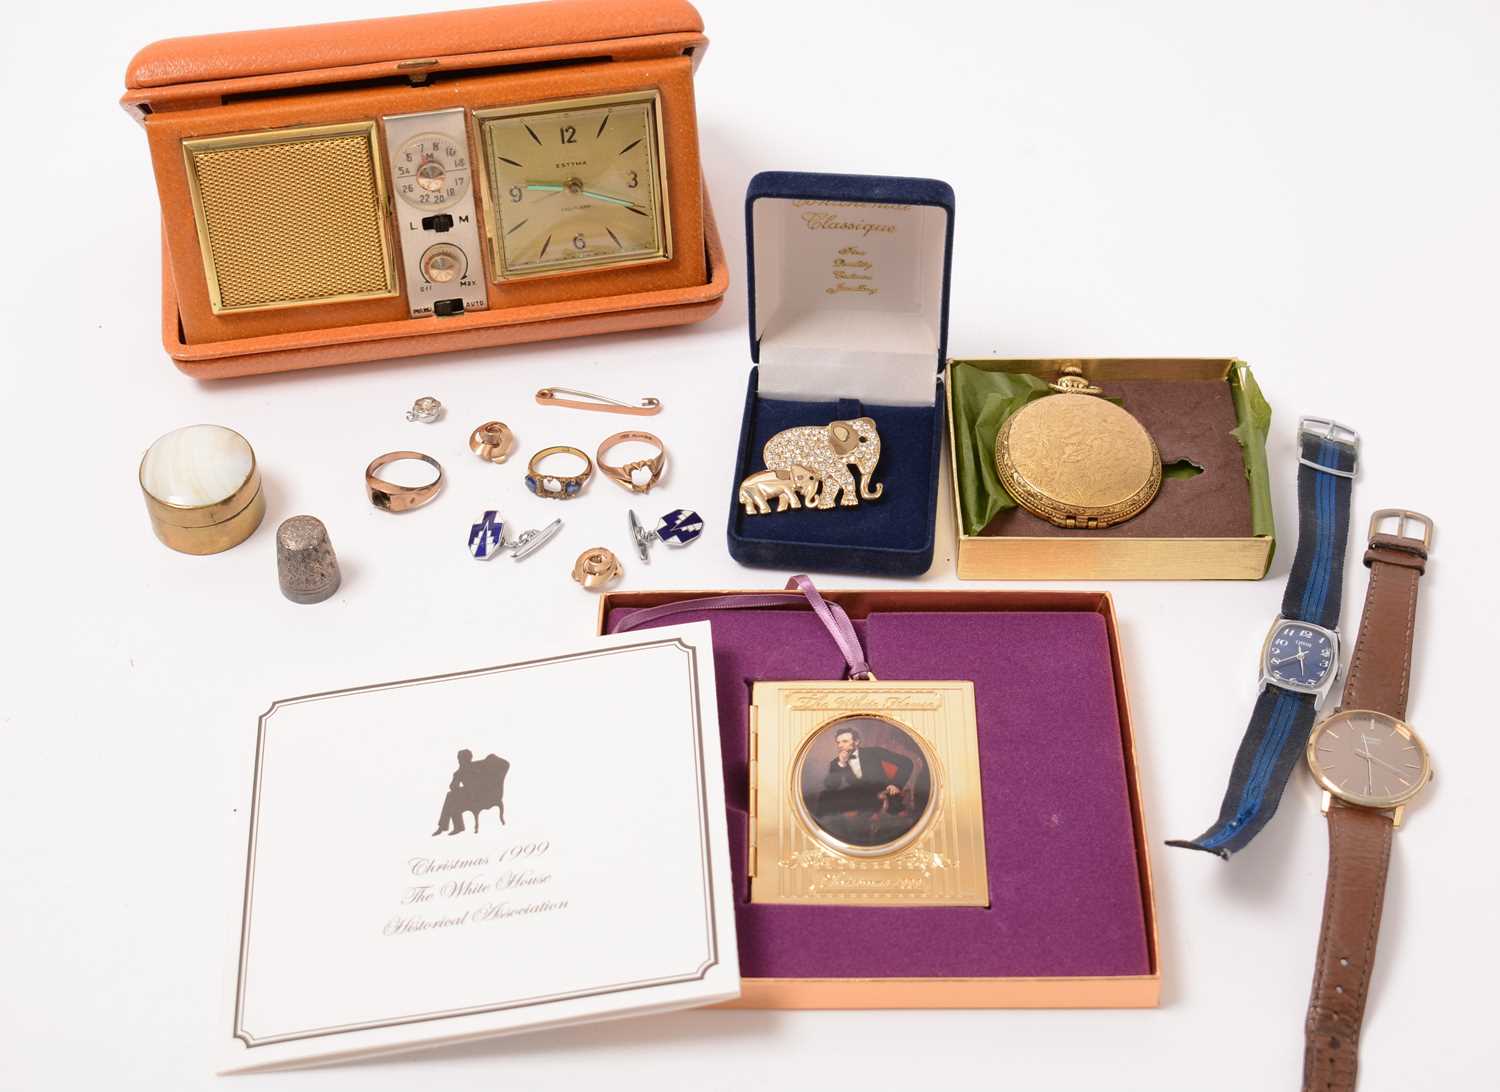 Lot 208 - Jewellery, watches, and a bedside alarm clock.